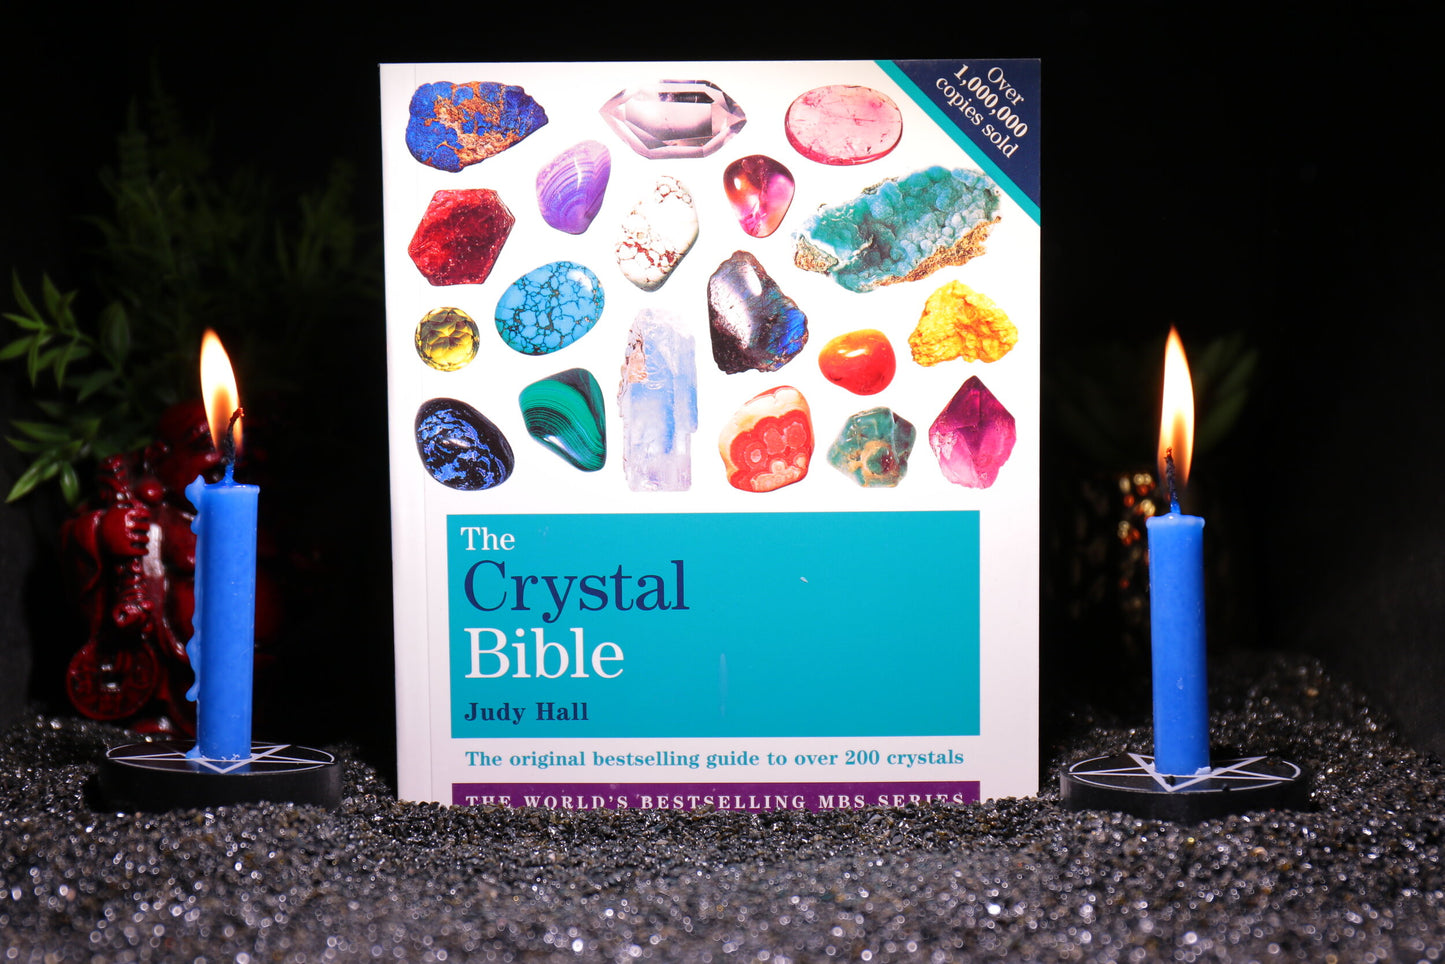 The Crystal Bible: The definitive guide to over 200 crystals